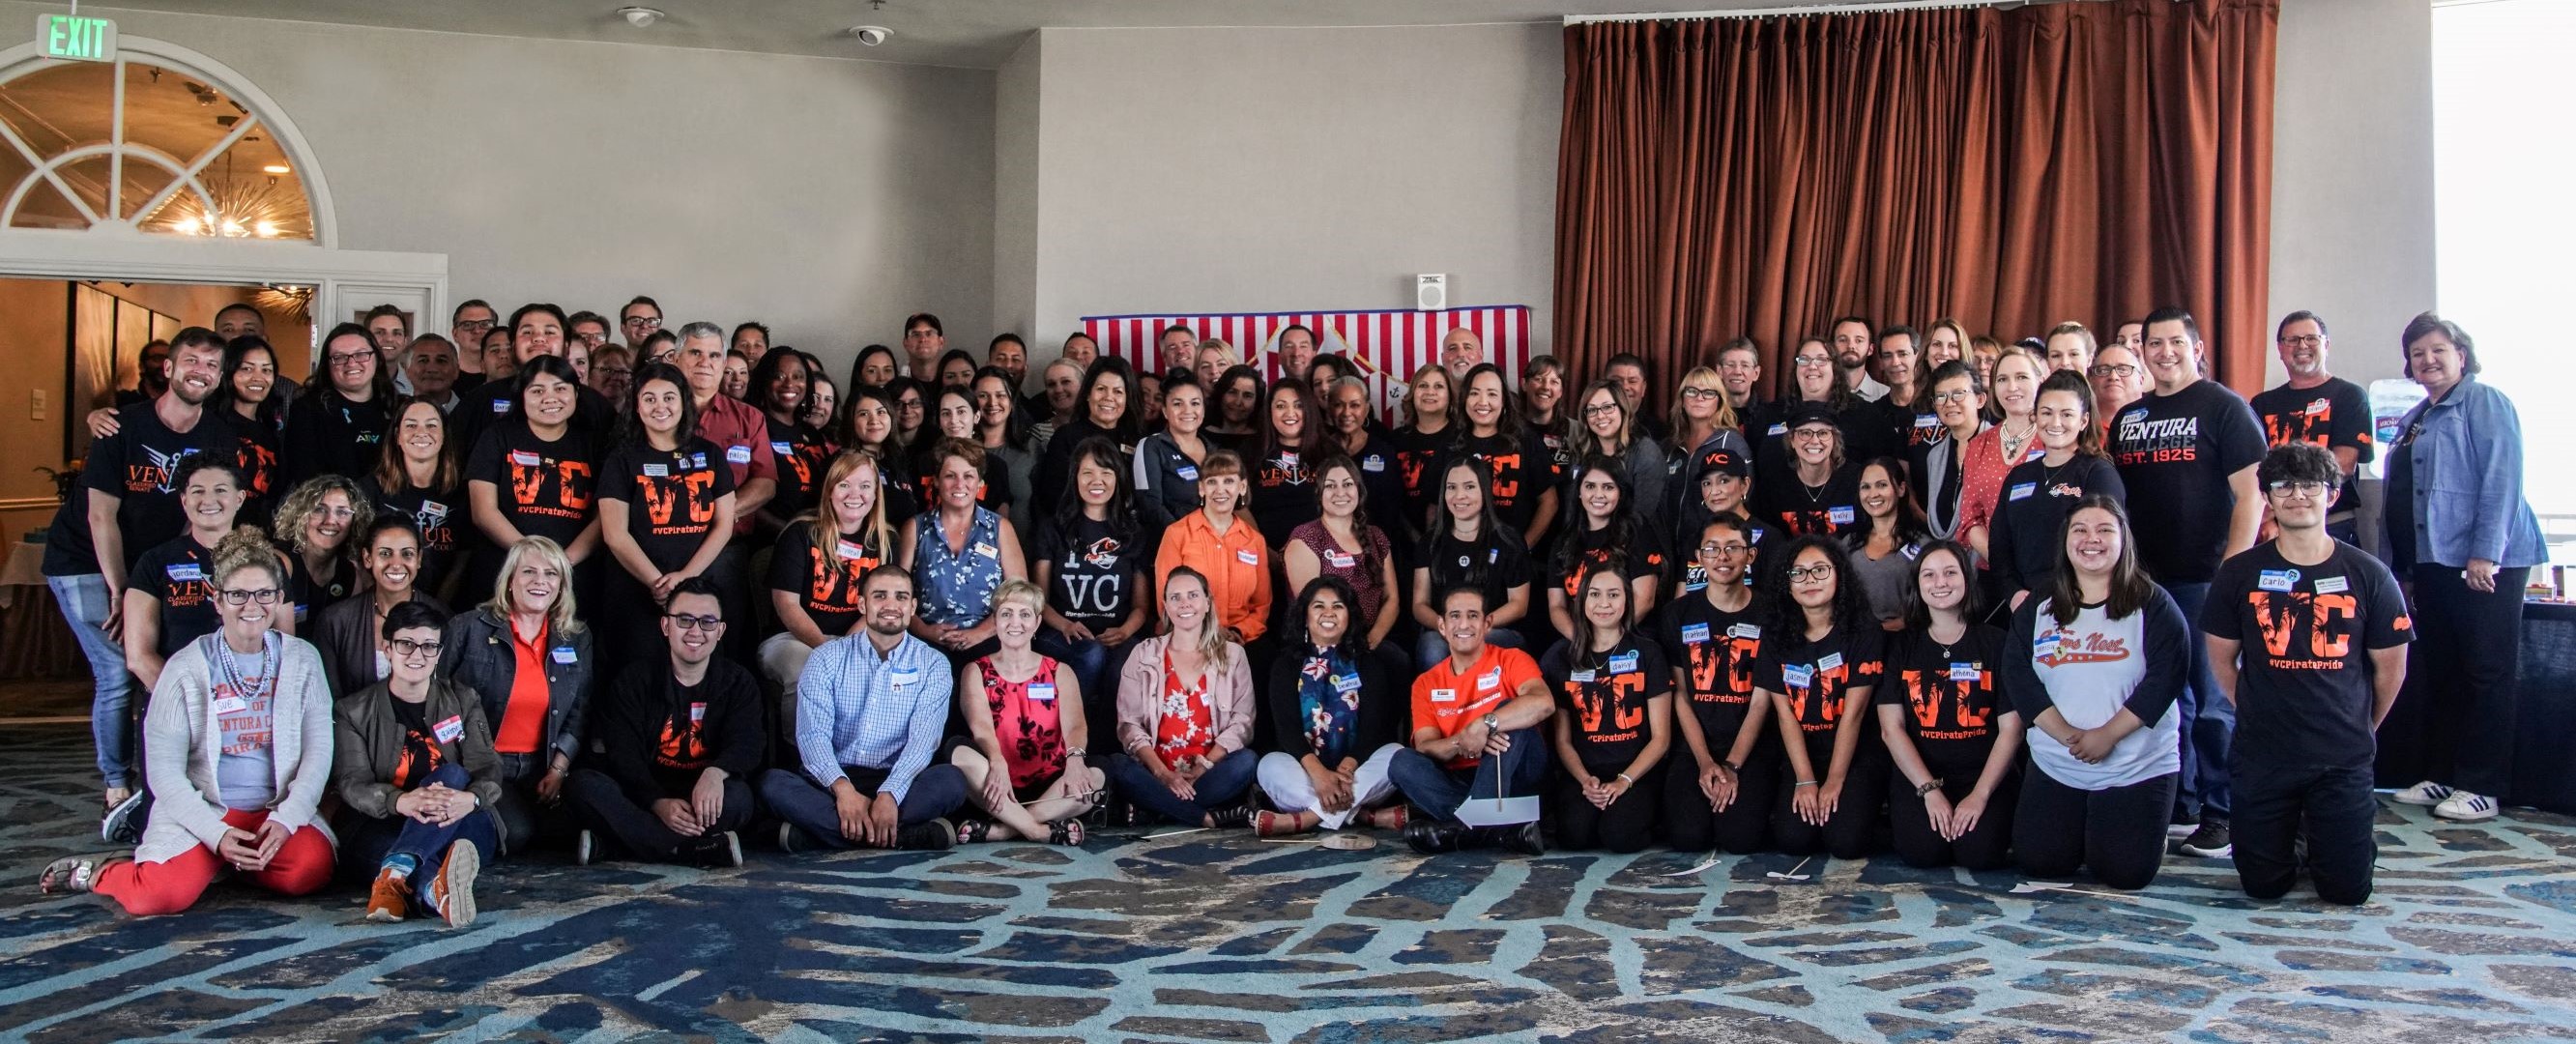 Ventura College Employee Group photo at college wide retreat held at the Ventura Crown Plaza.